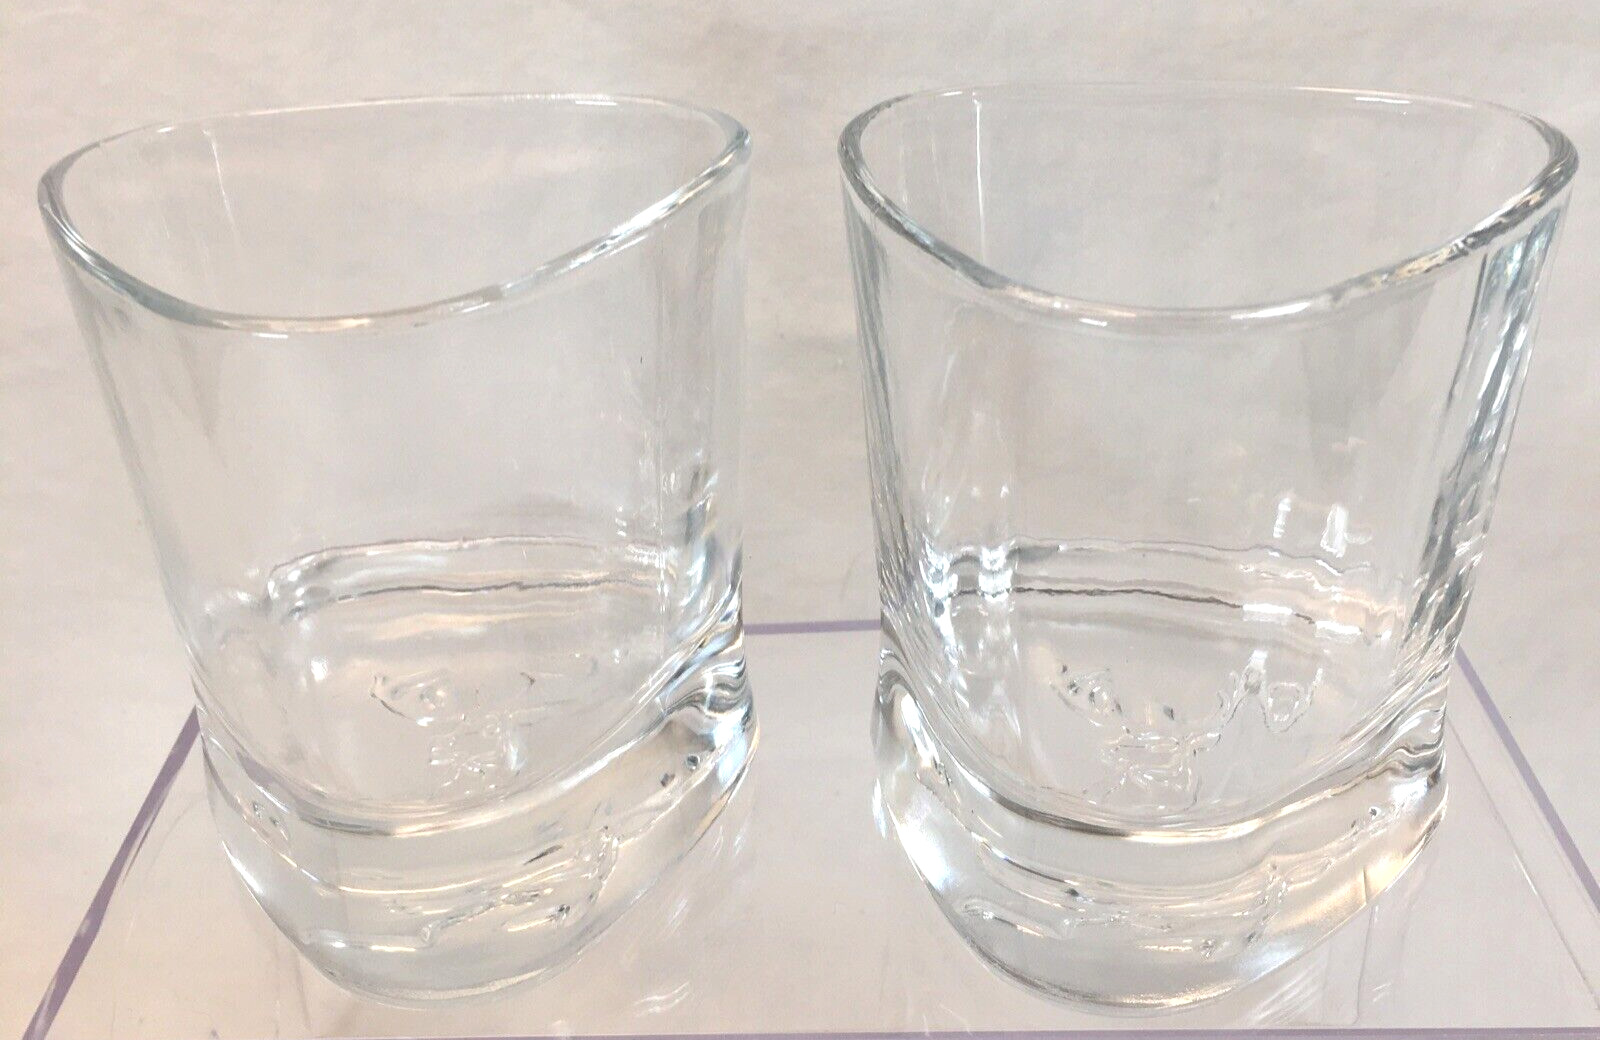 Triangle Shaped Heavy Bottom Glasses With Deer/Buck Embossed In The Bottom